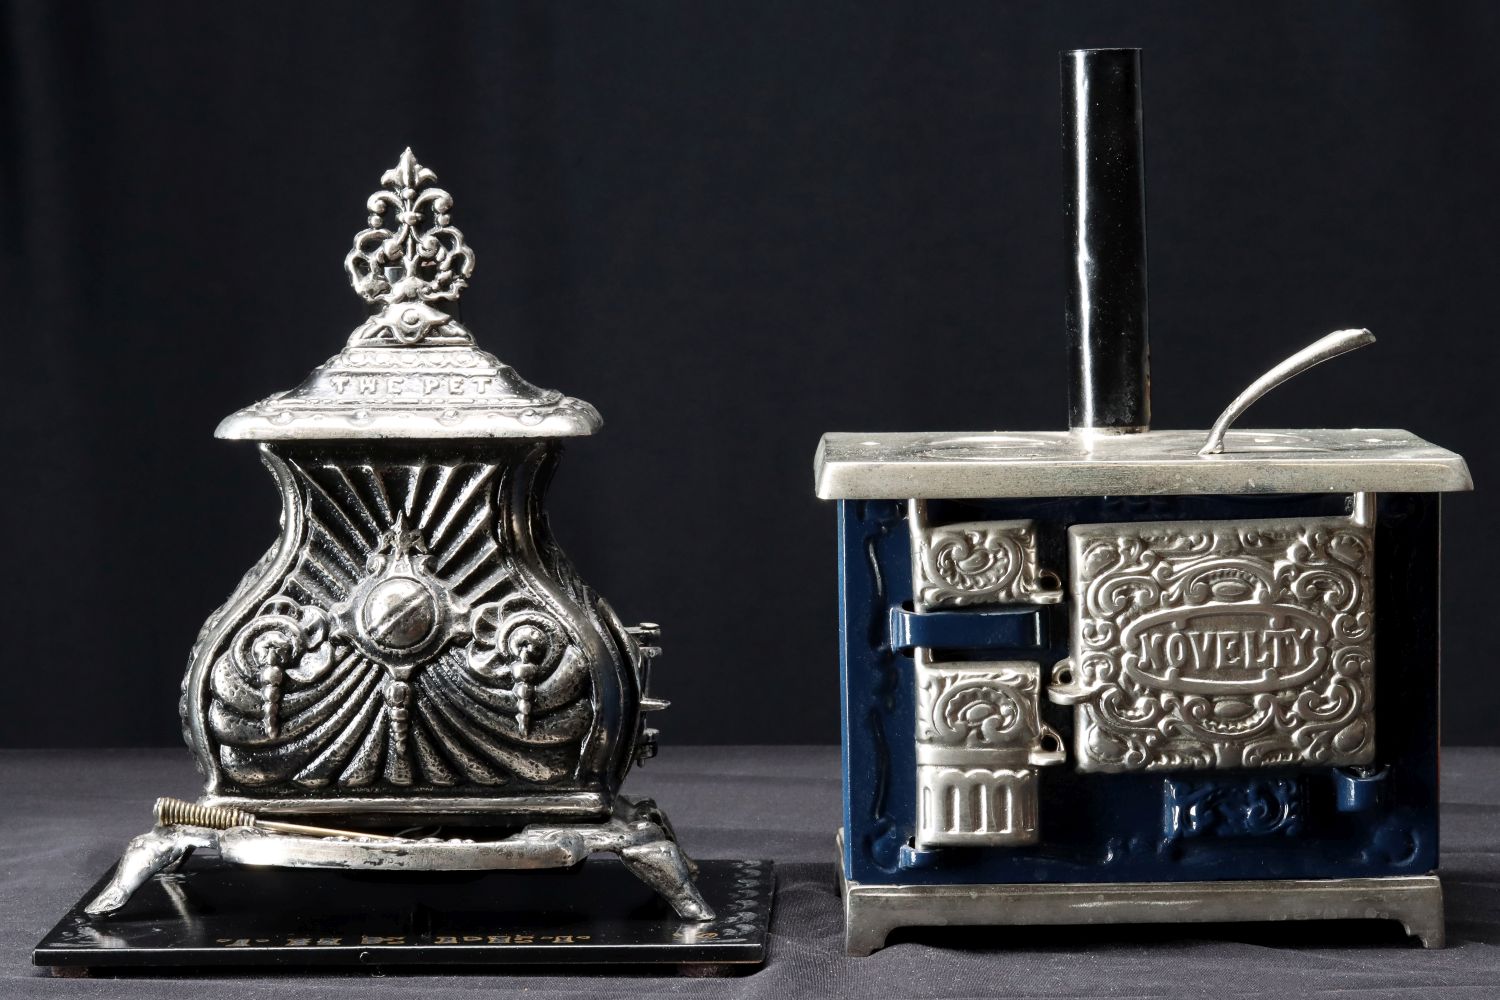 'THE PET' AND 'NOVELTY' REPRODUCTION IRON TOY STOVES